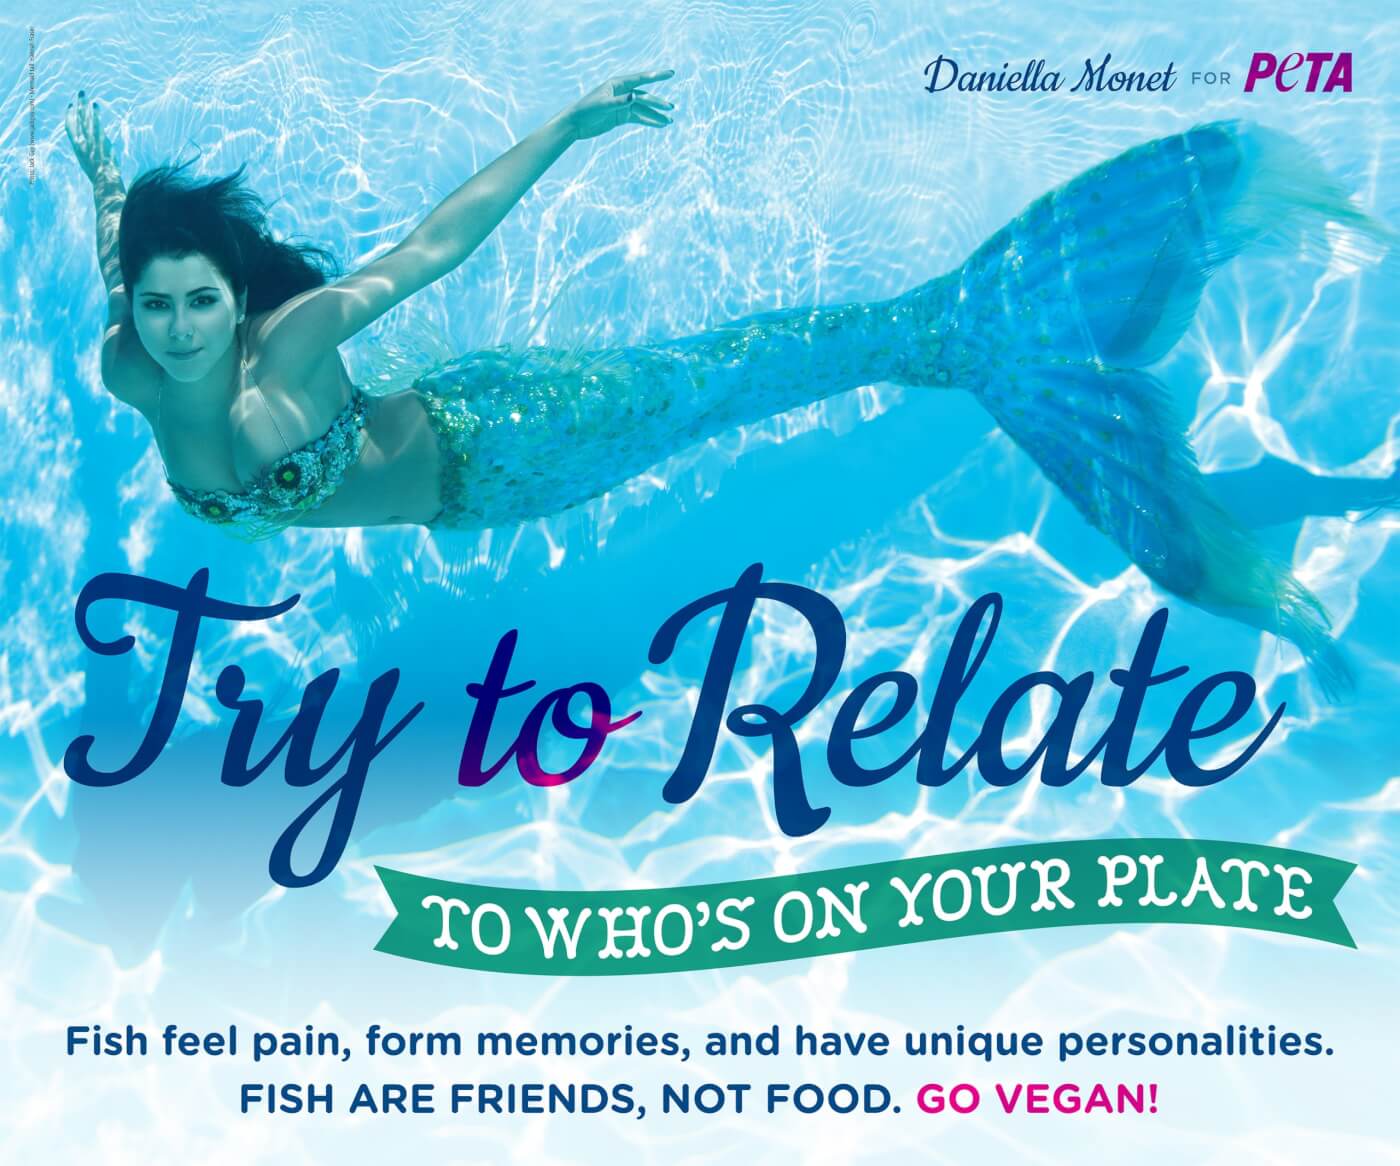 Daniella Monet as a mermaid underwater. Text reads "Try to Relate to Who's on Your Plate. Fish feel pain, form memories, and have unique personalities. Fish are friends, not food. Go Vegan!"